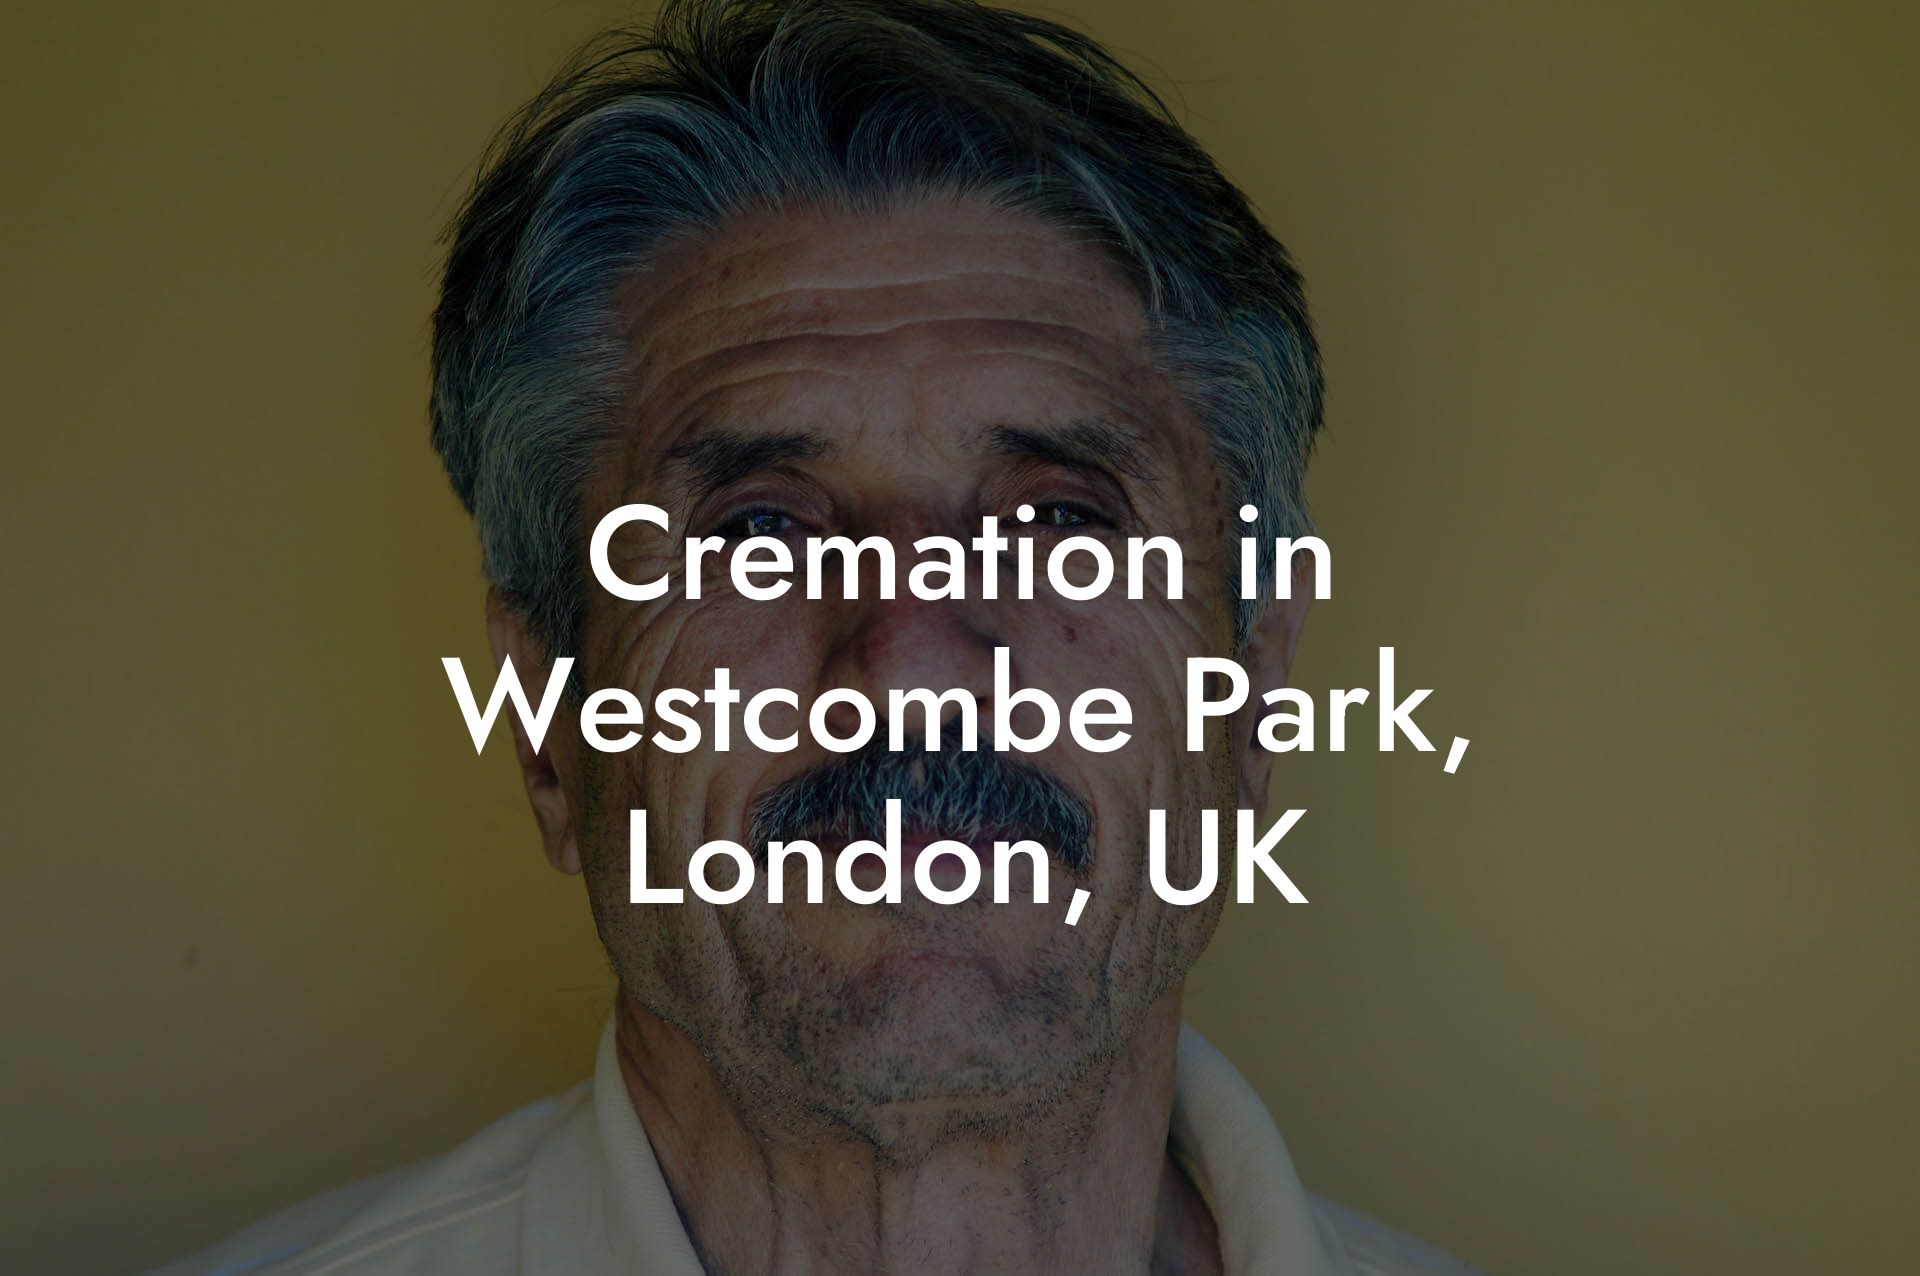 Cremation in Westcombe Park, London, UK